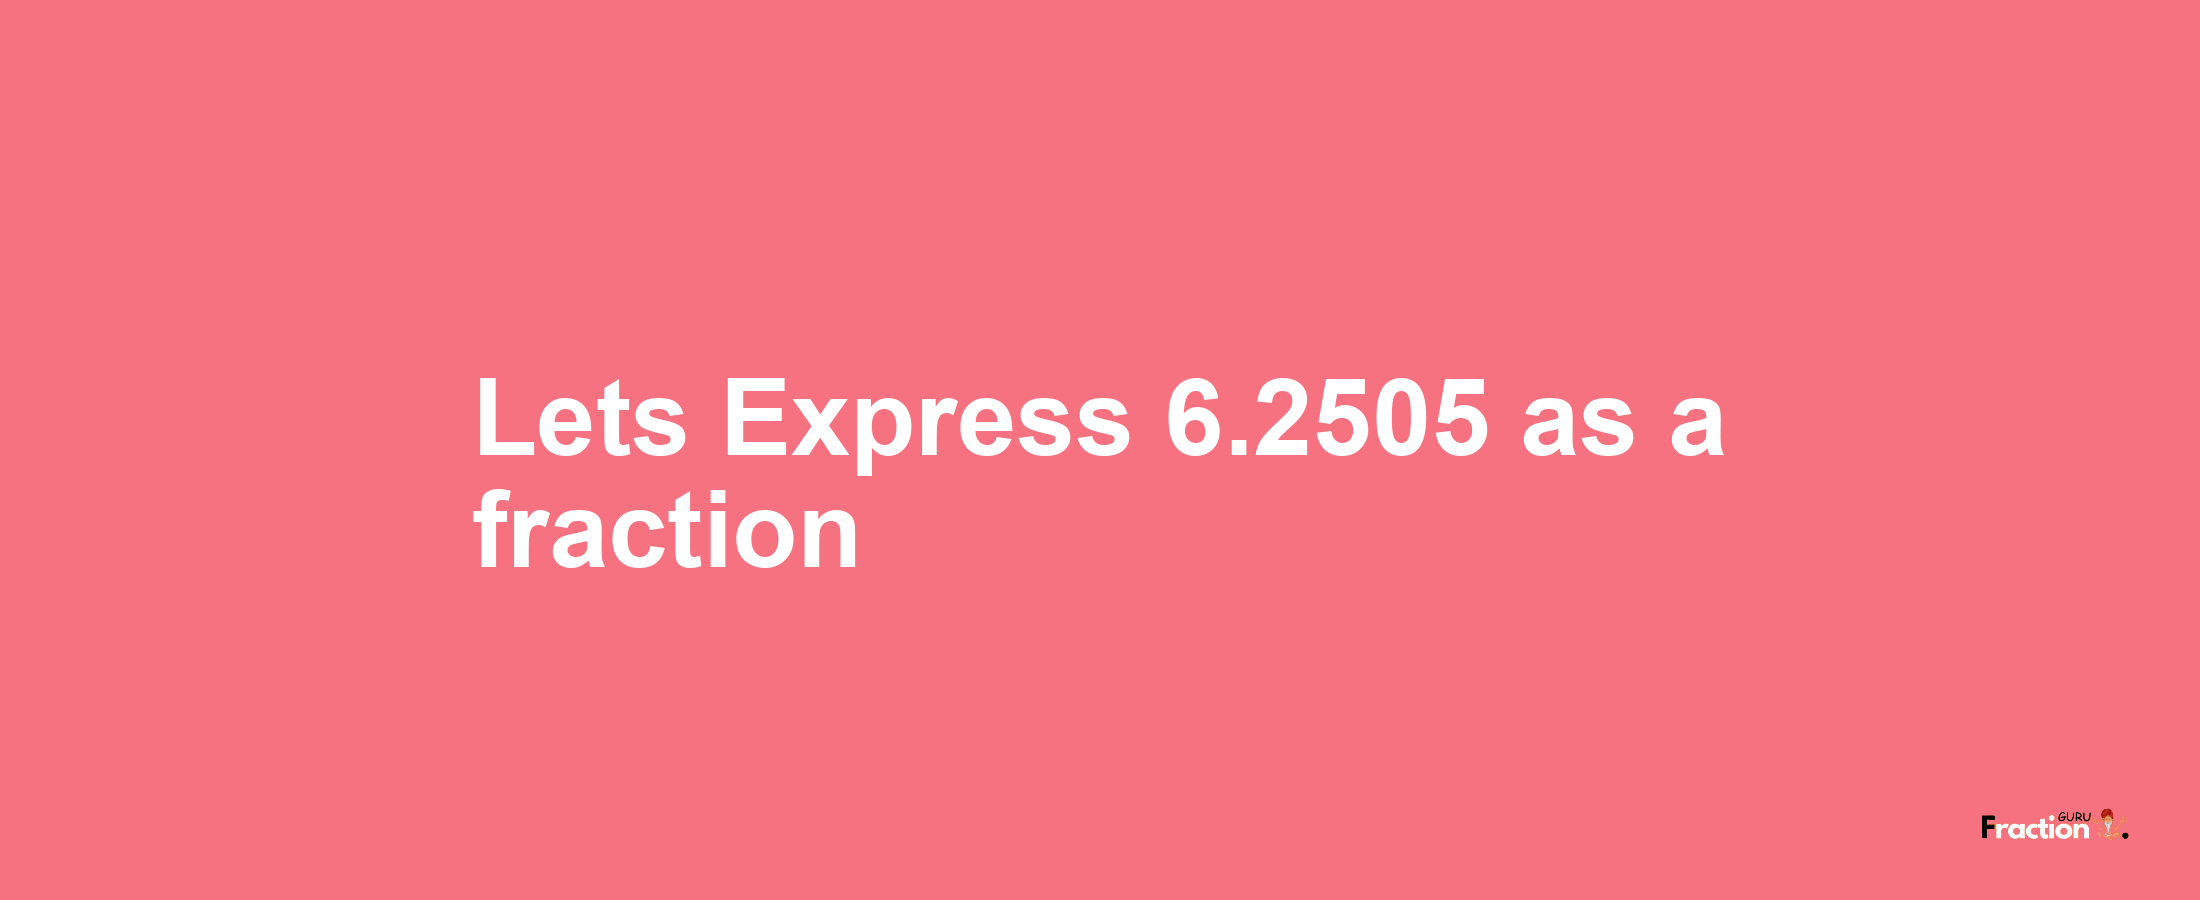 Lets Express 6.2505 as afraction